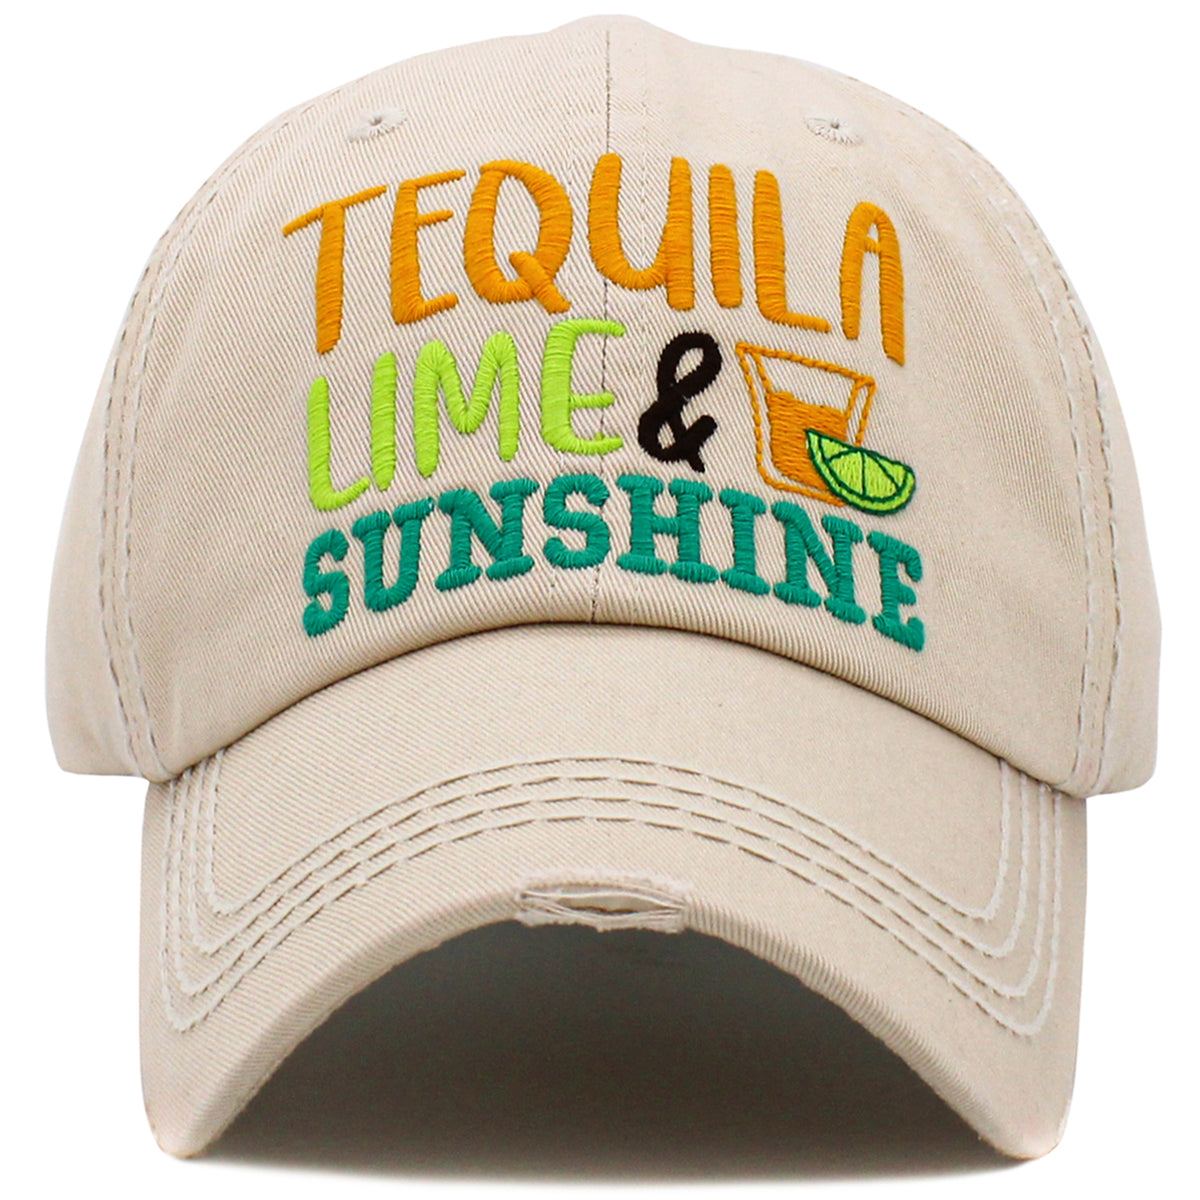 1517 - Tequila Lime Sunshine Hat - Stone